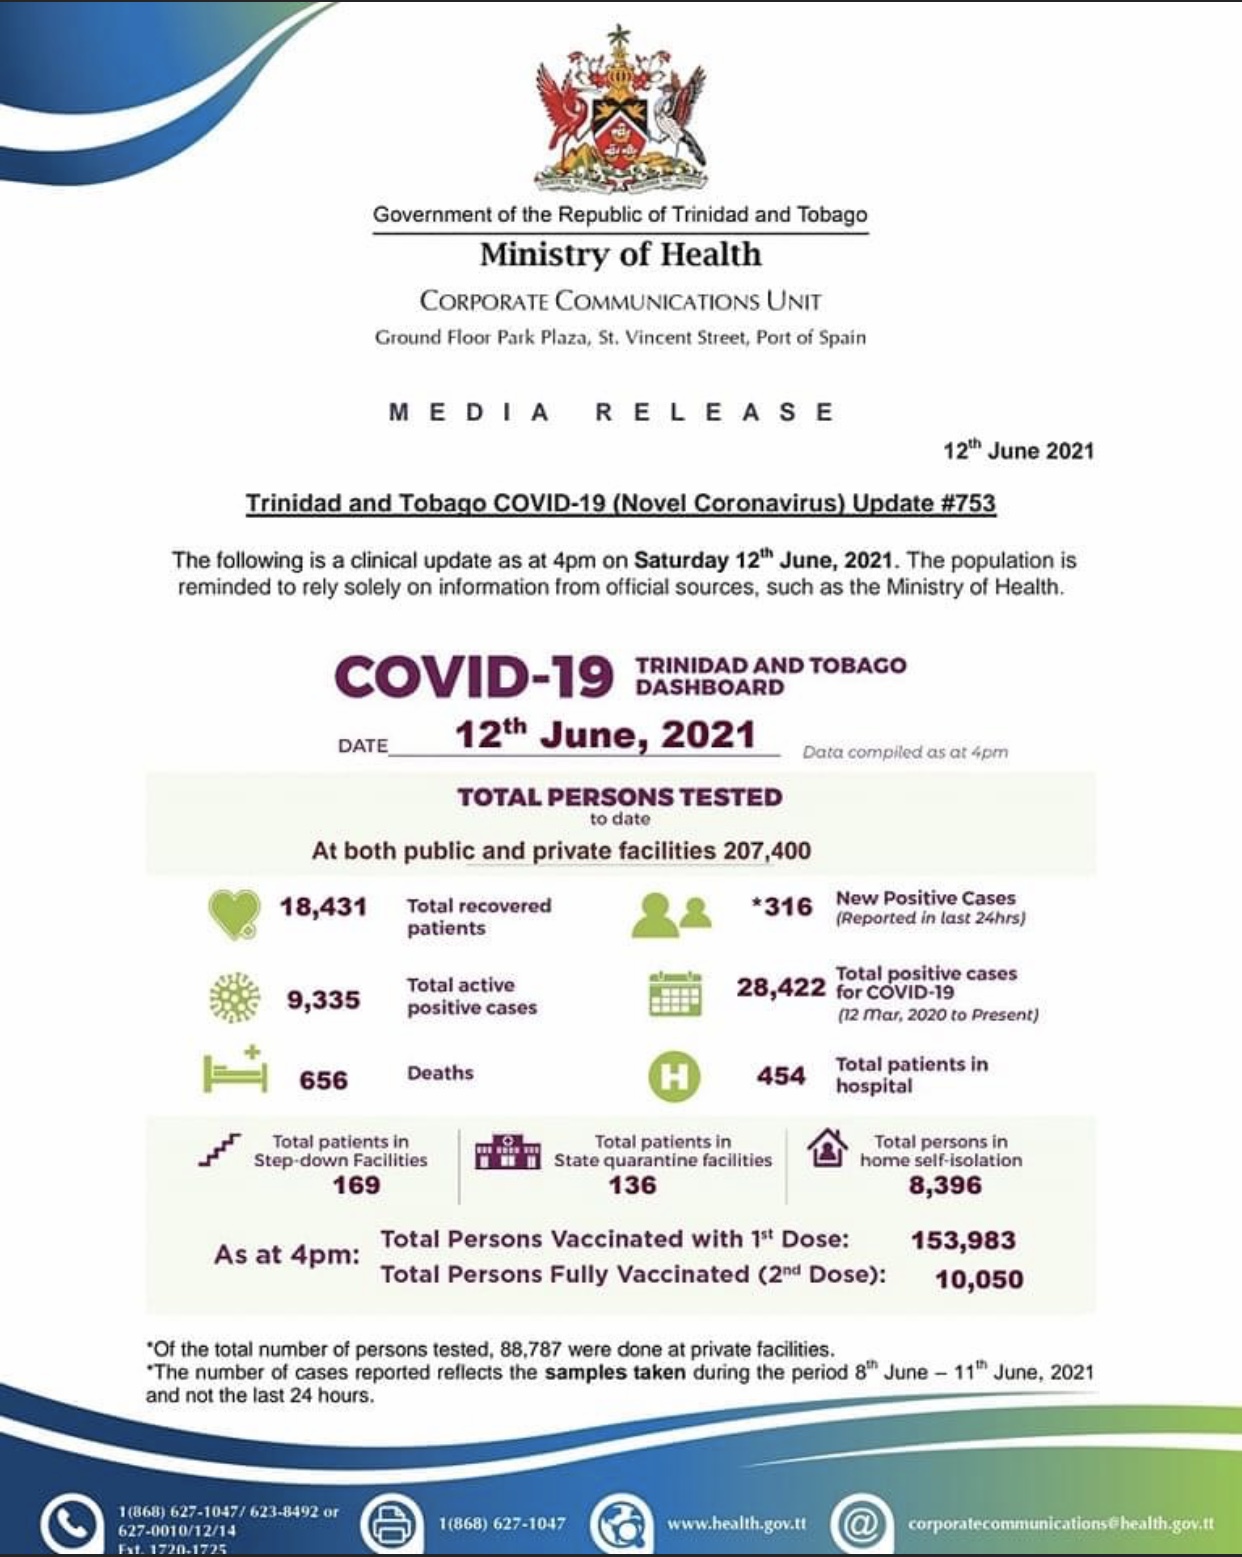 Covid update: 12 additional deaths and 316 active cases